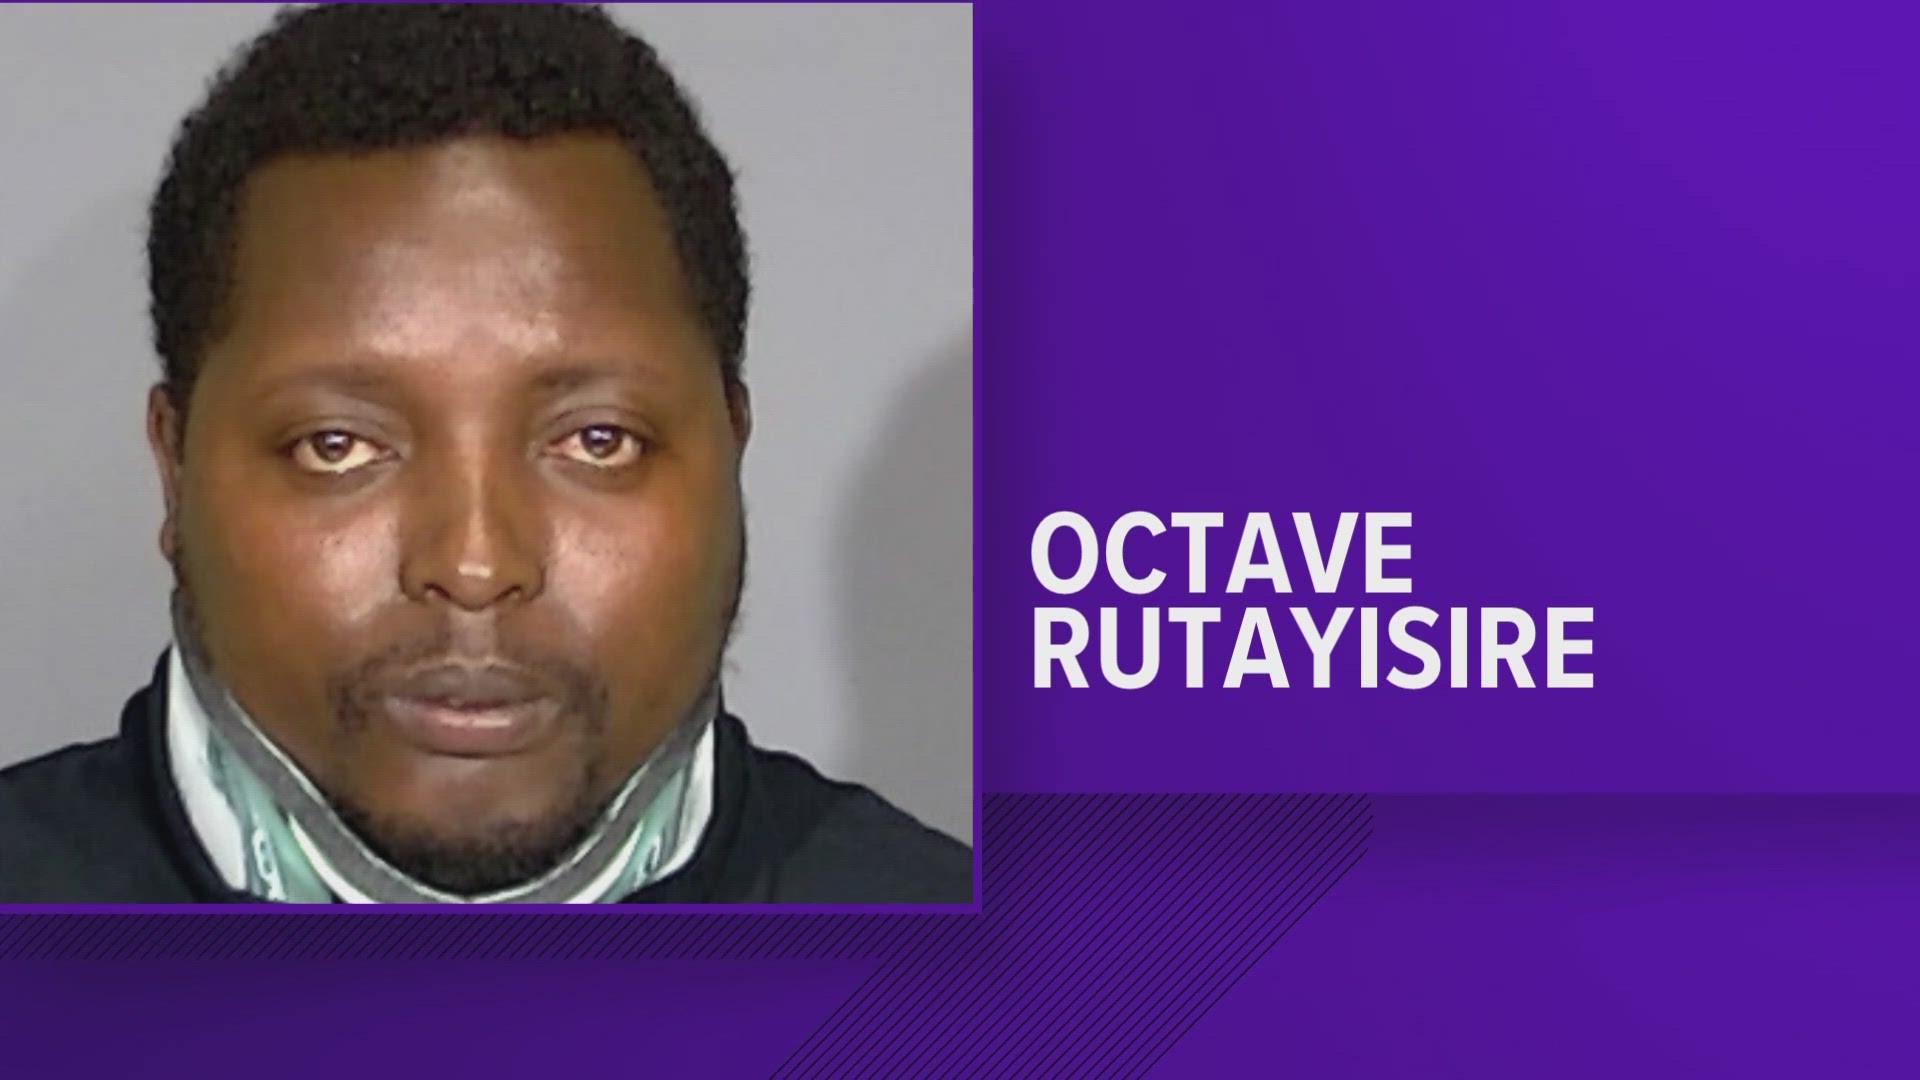 Octave Rutayisire was just charged with OWI  resulting in death.